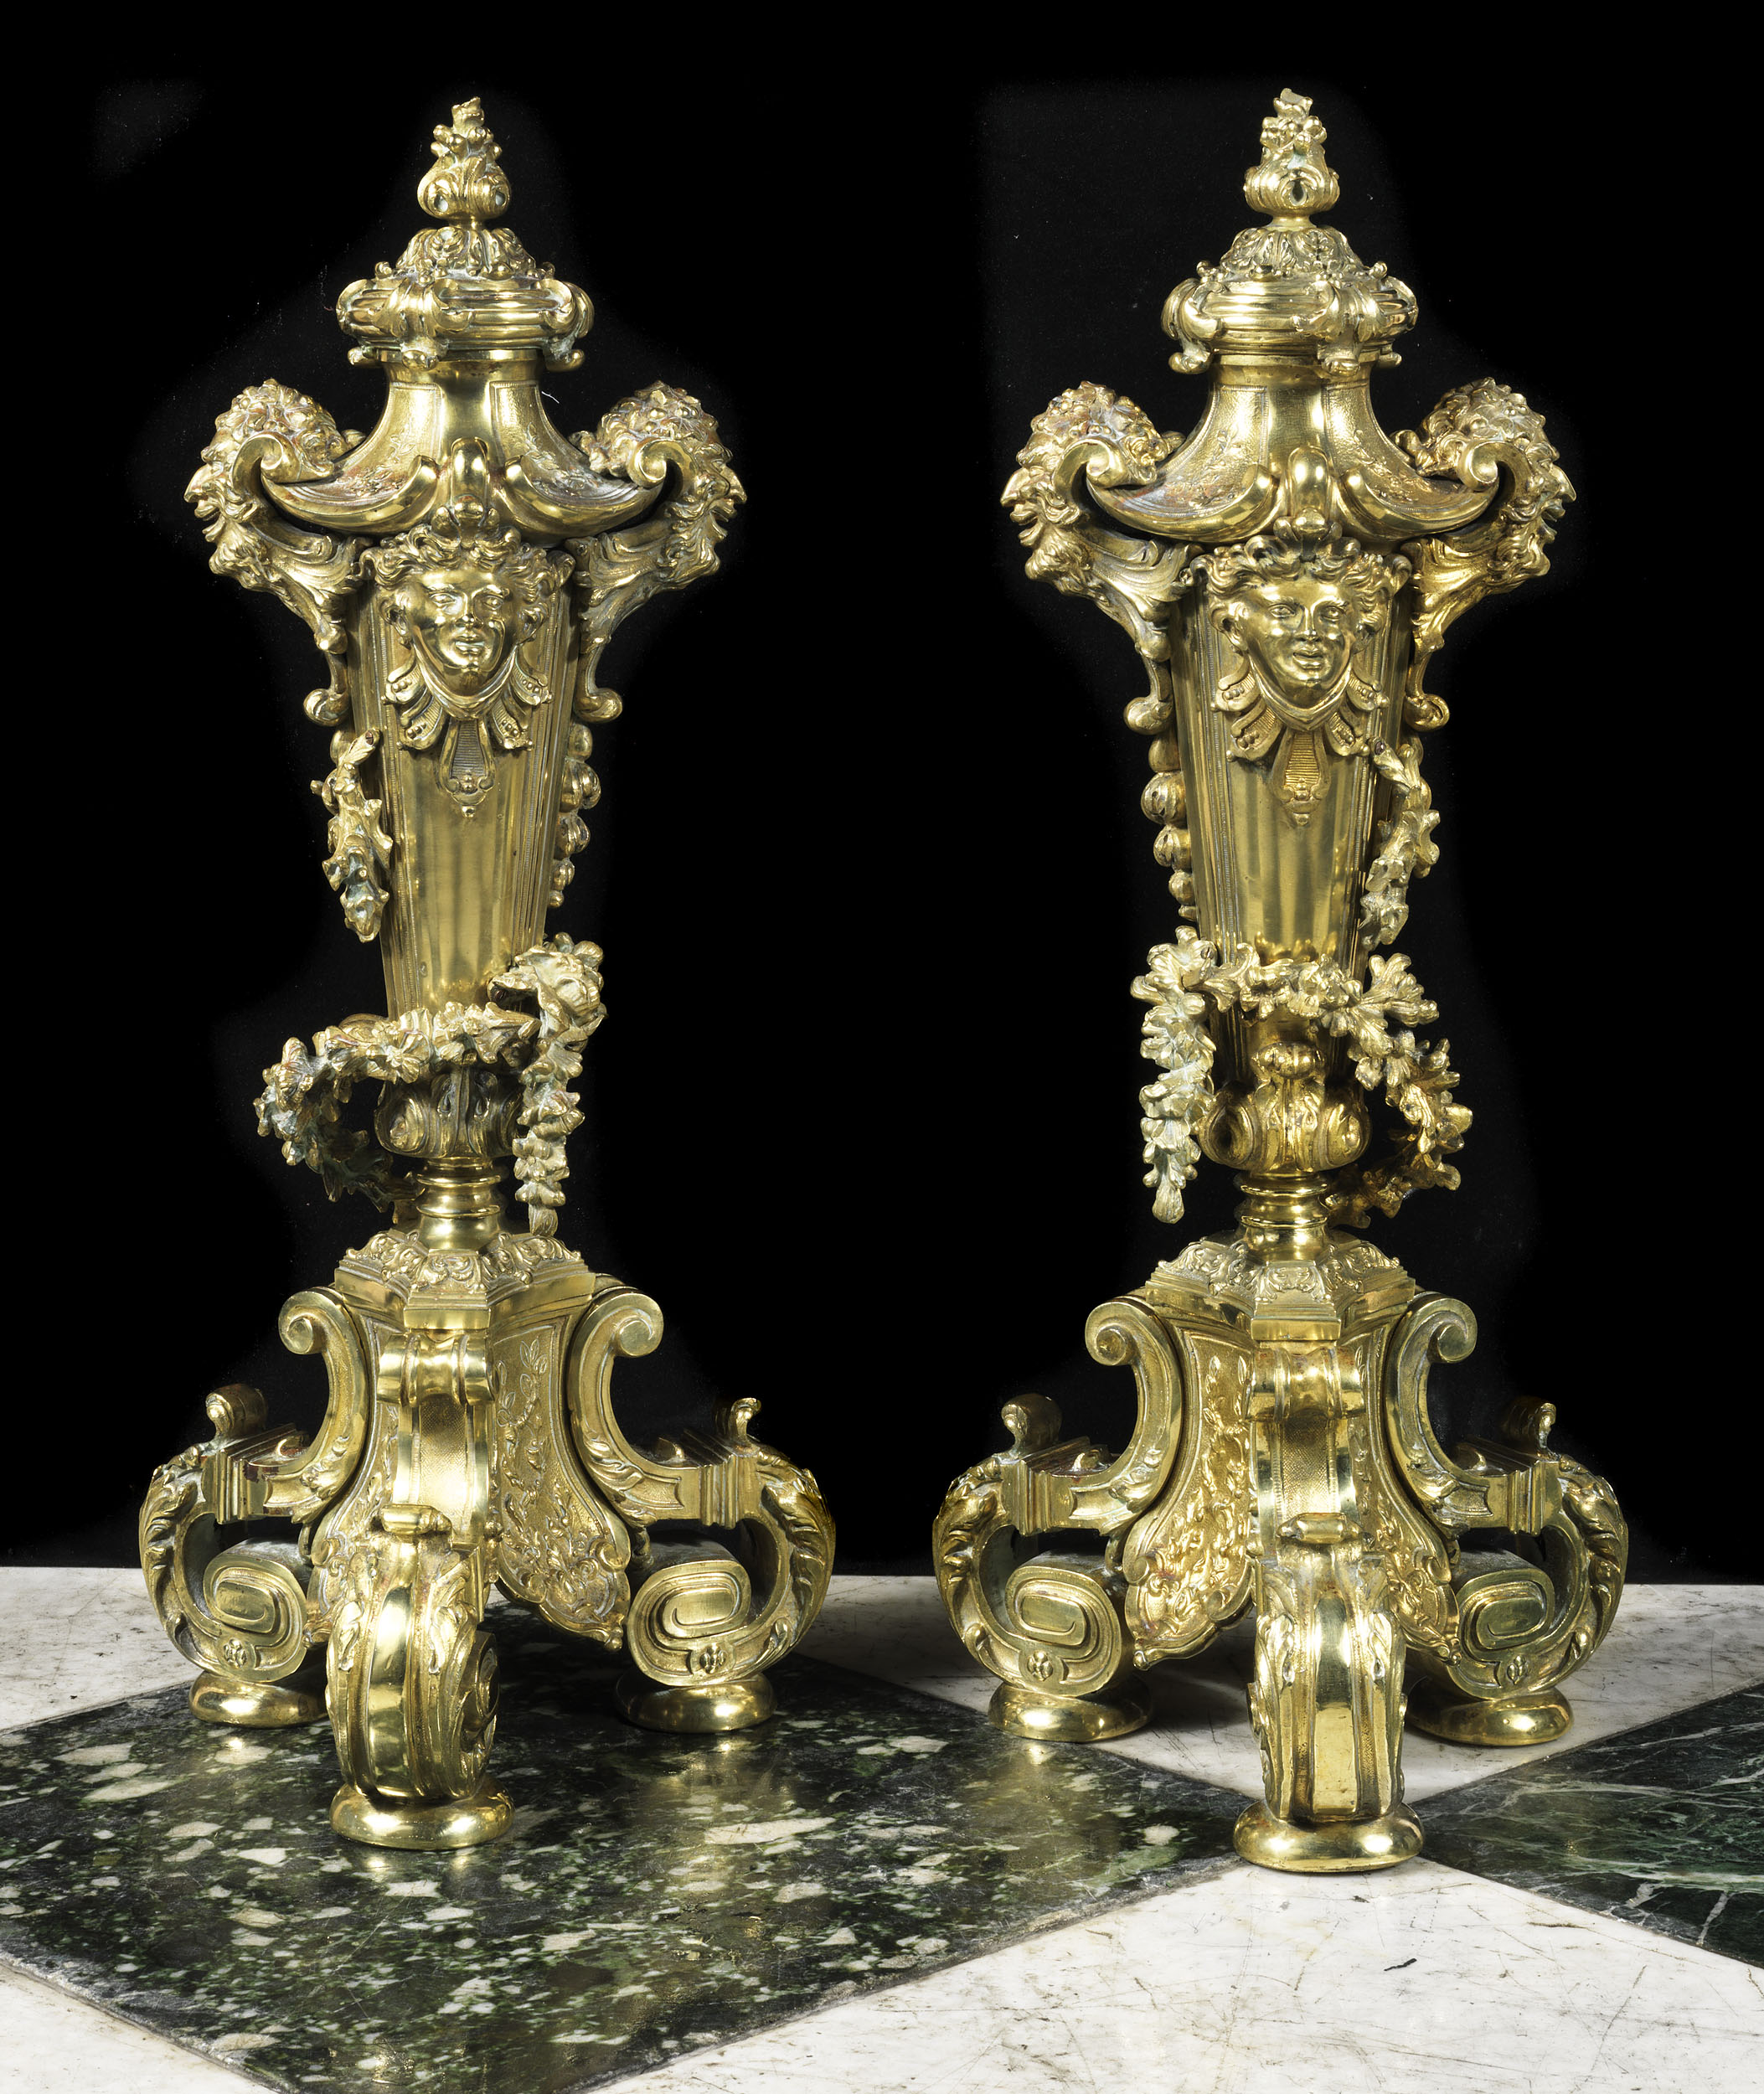 Antique Chenets in Louis XVI style cast in Gilt Bronze

